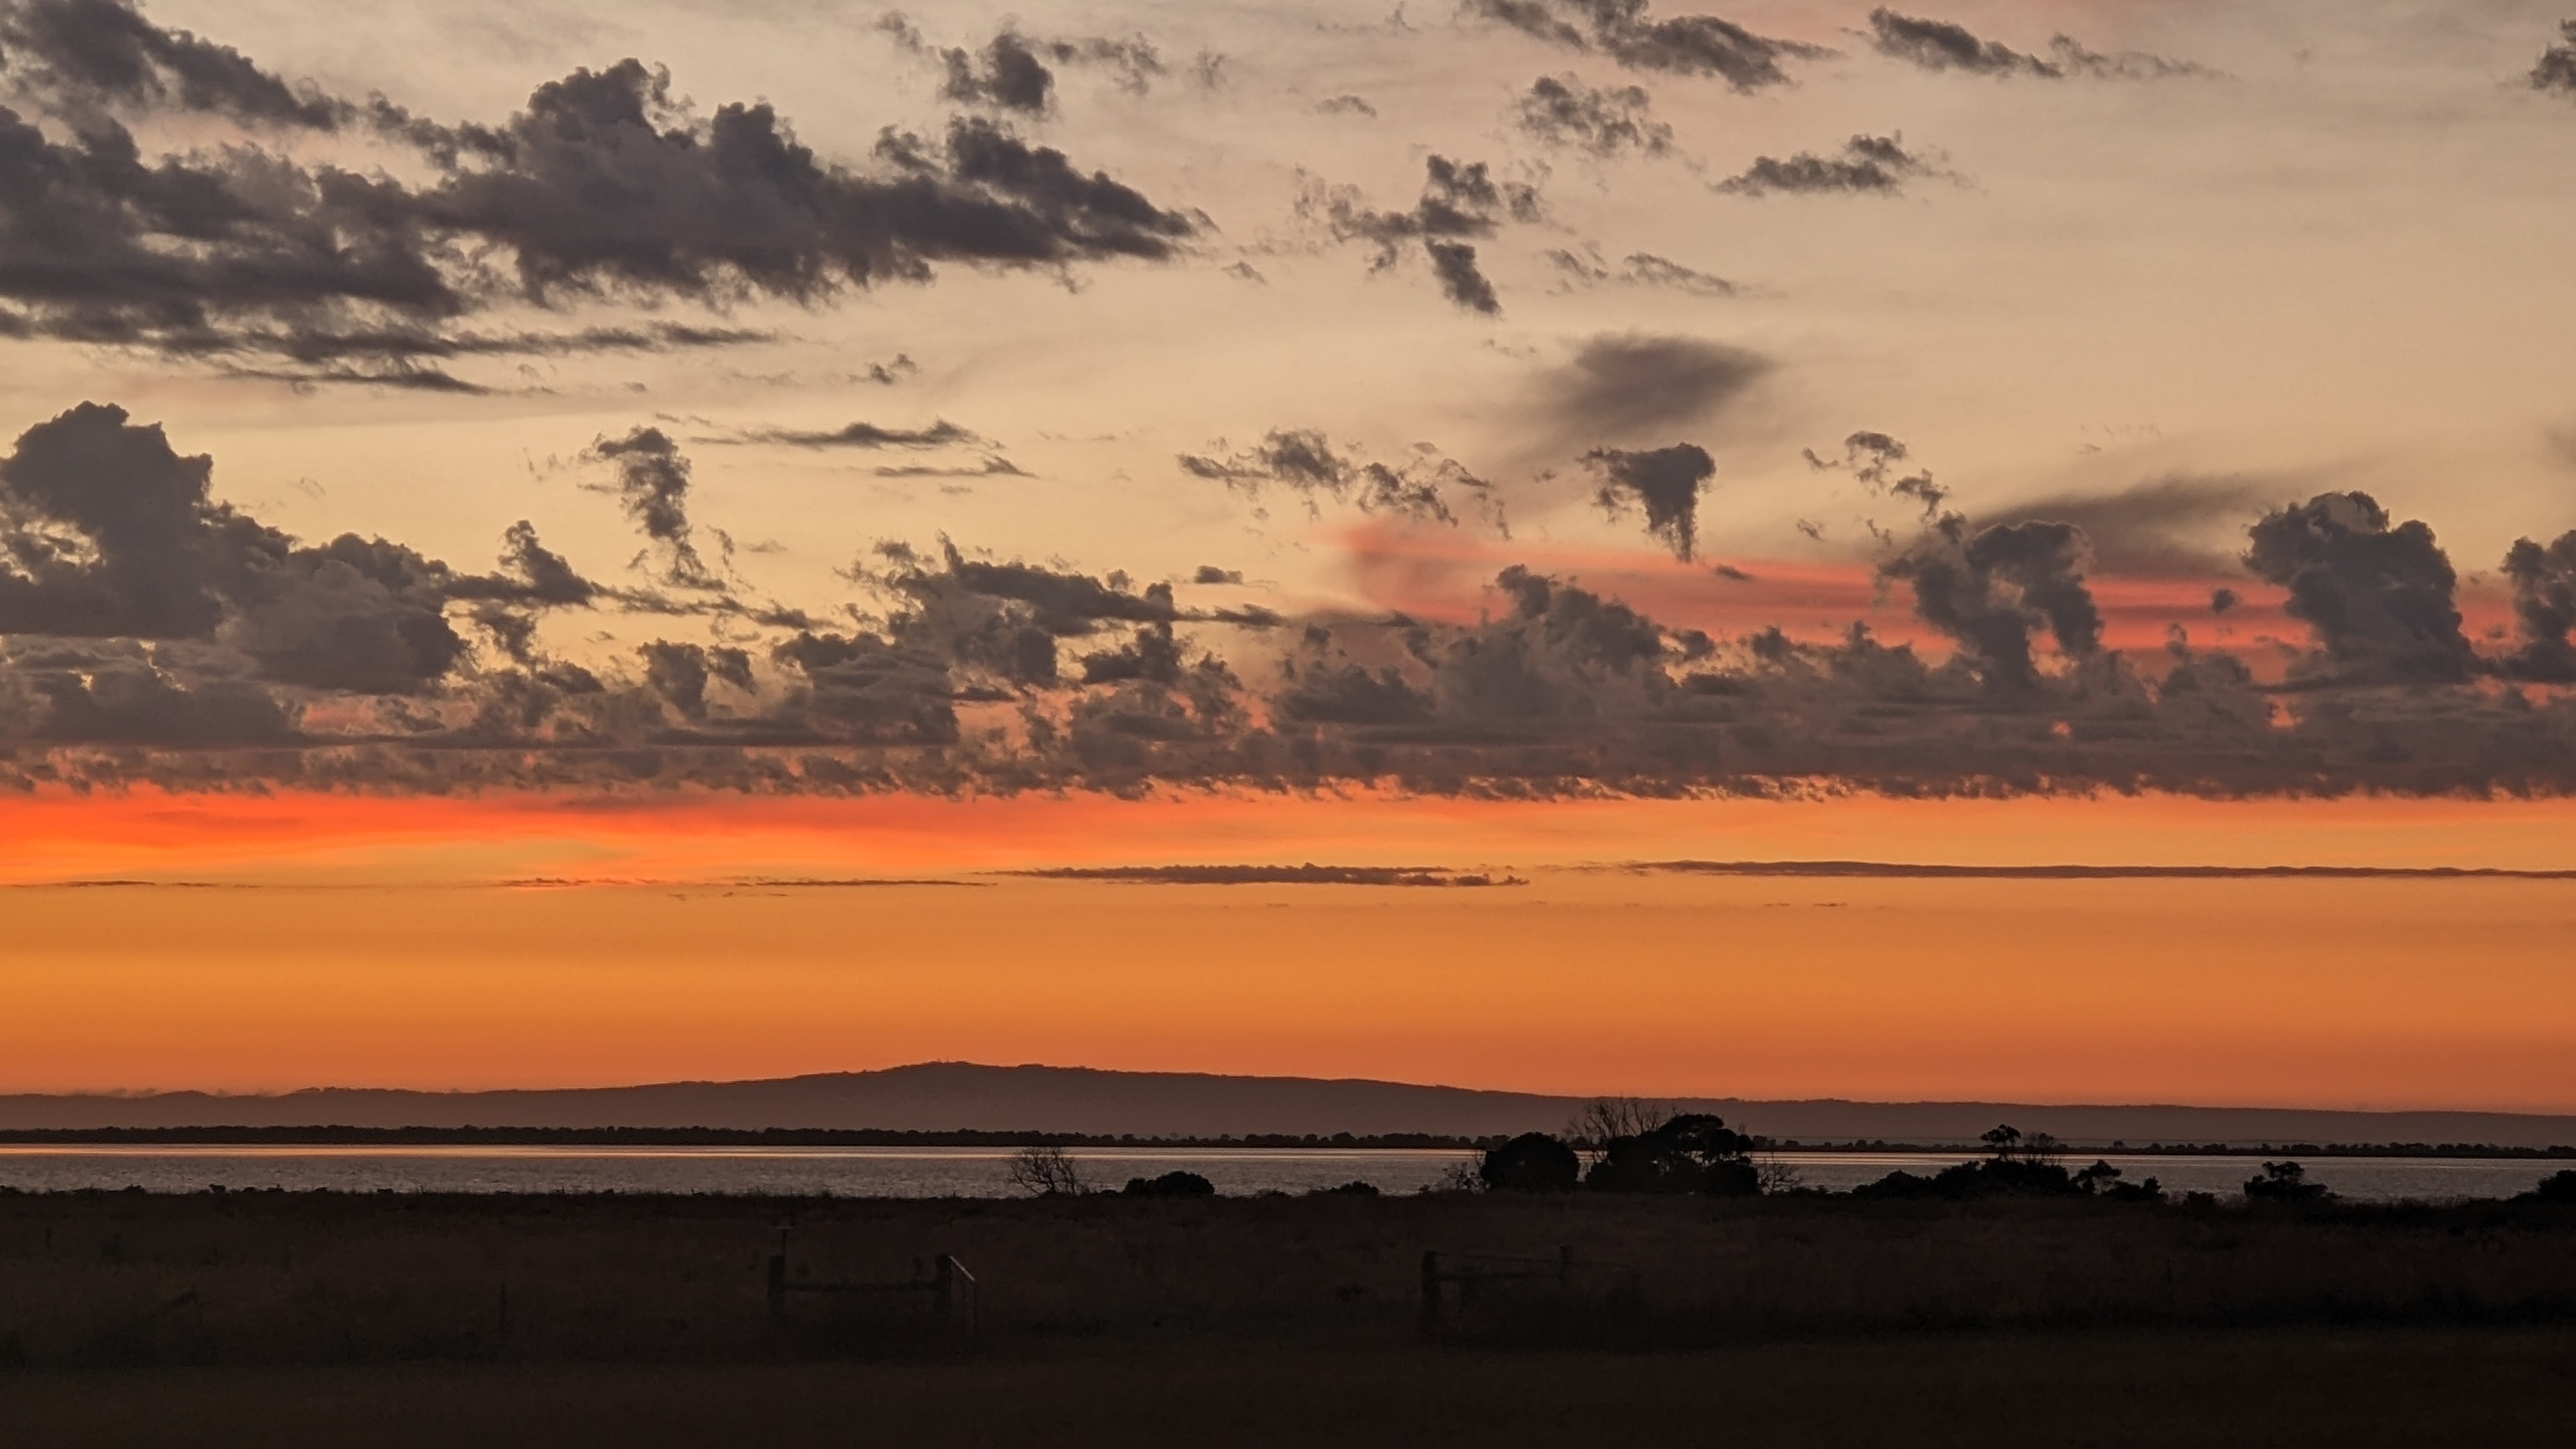 The view from Roux's property in Bellarine looking across at Mornington with Arthur's Seat on the horizon.